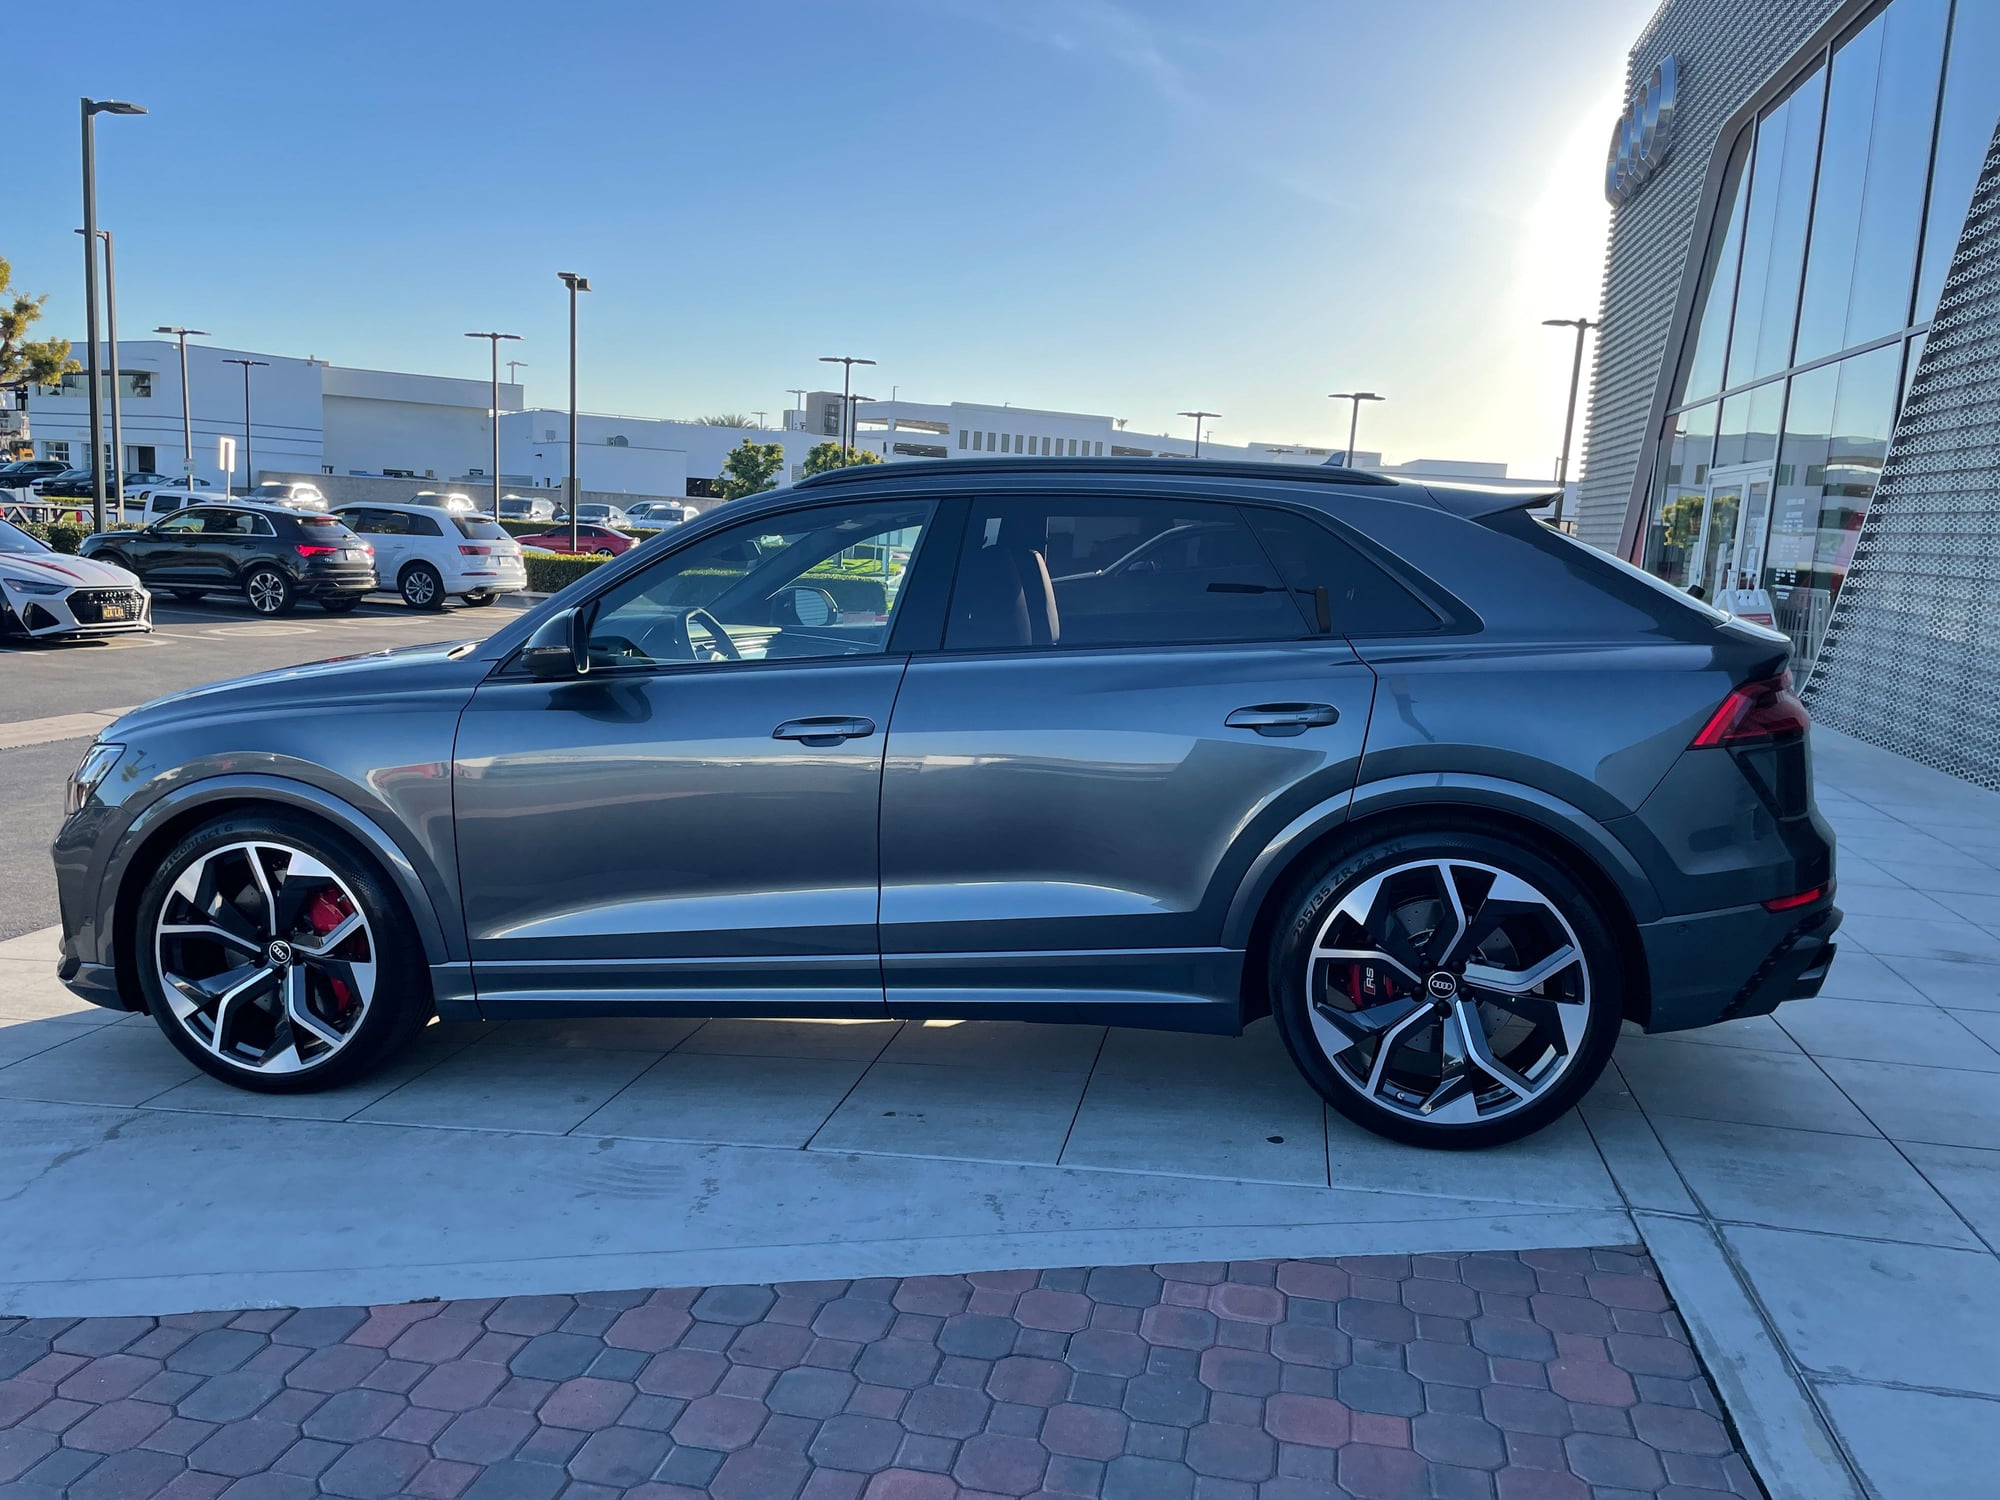 Wheels and Tires/Axles - Audi RSQ8 OEM wheels and tires 295/35/23 with approx 2K miles. - Used - Tustin, CA 92705, United States